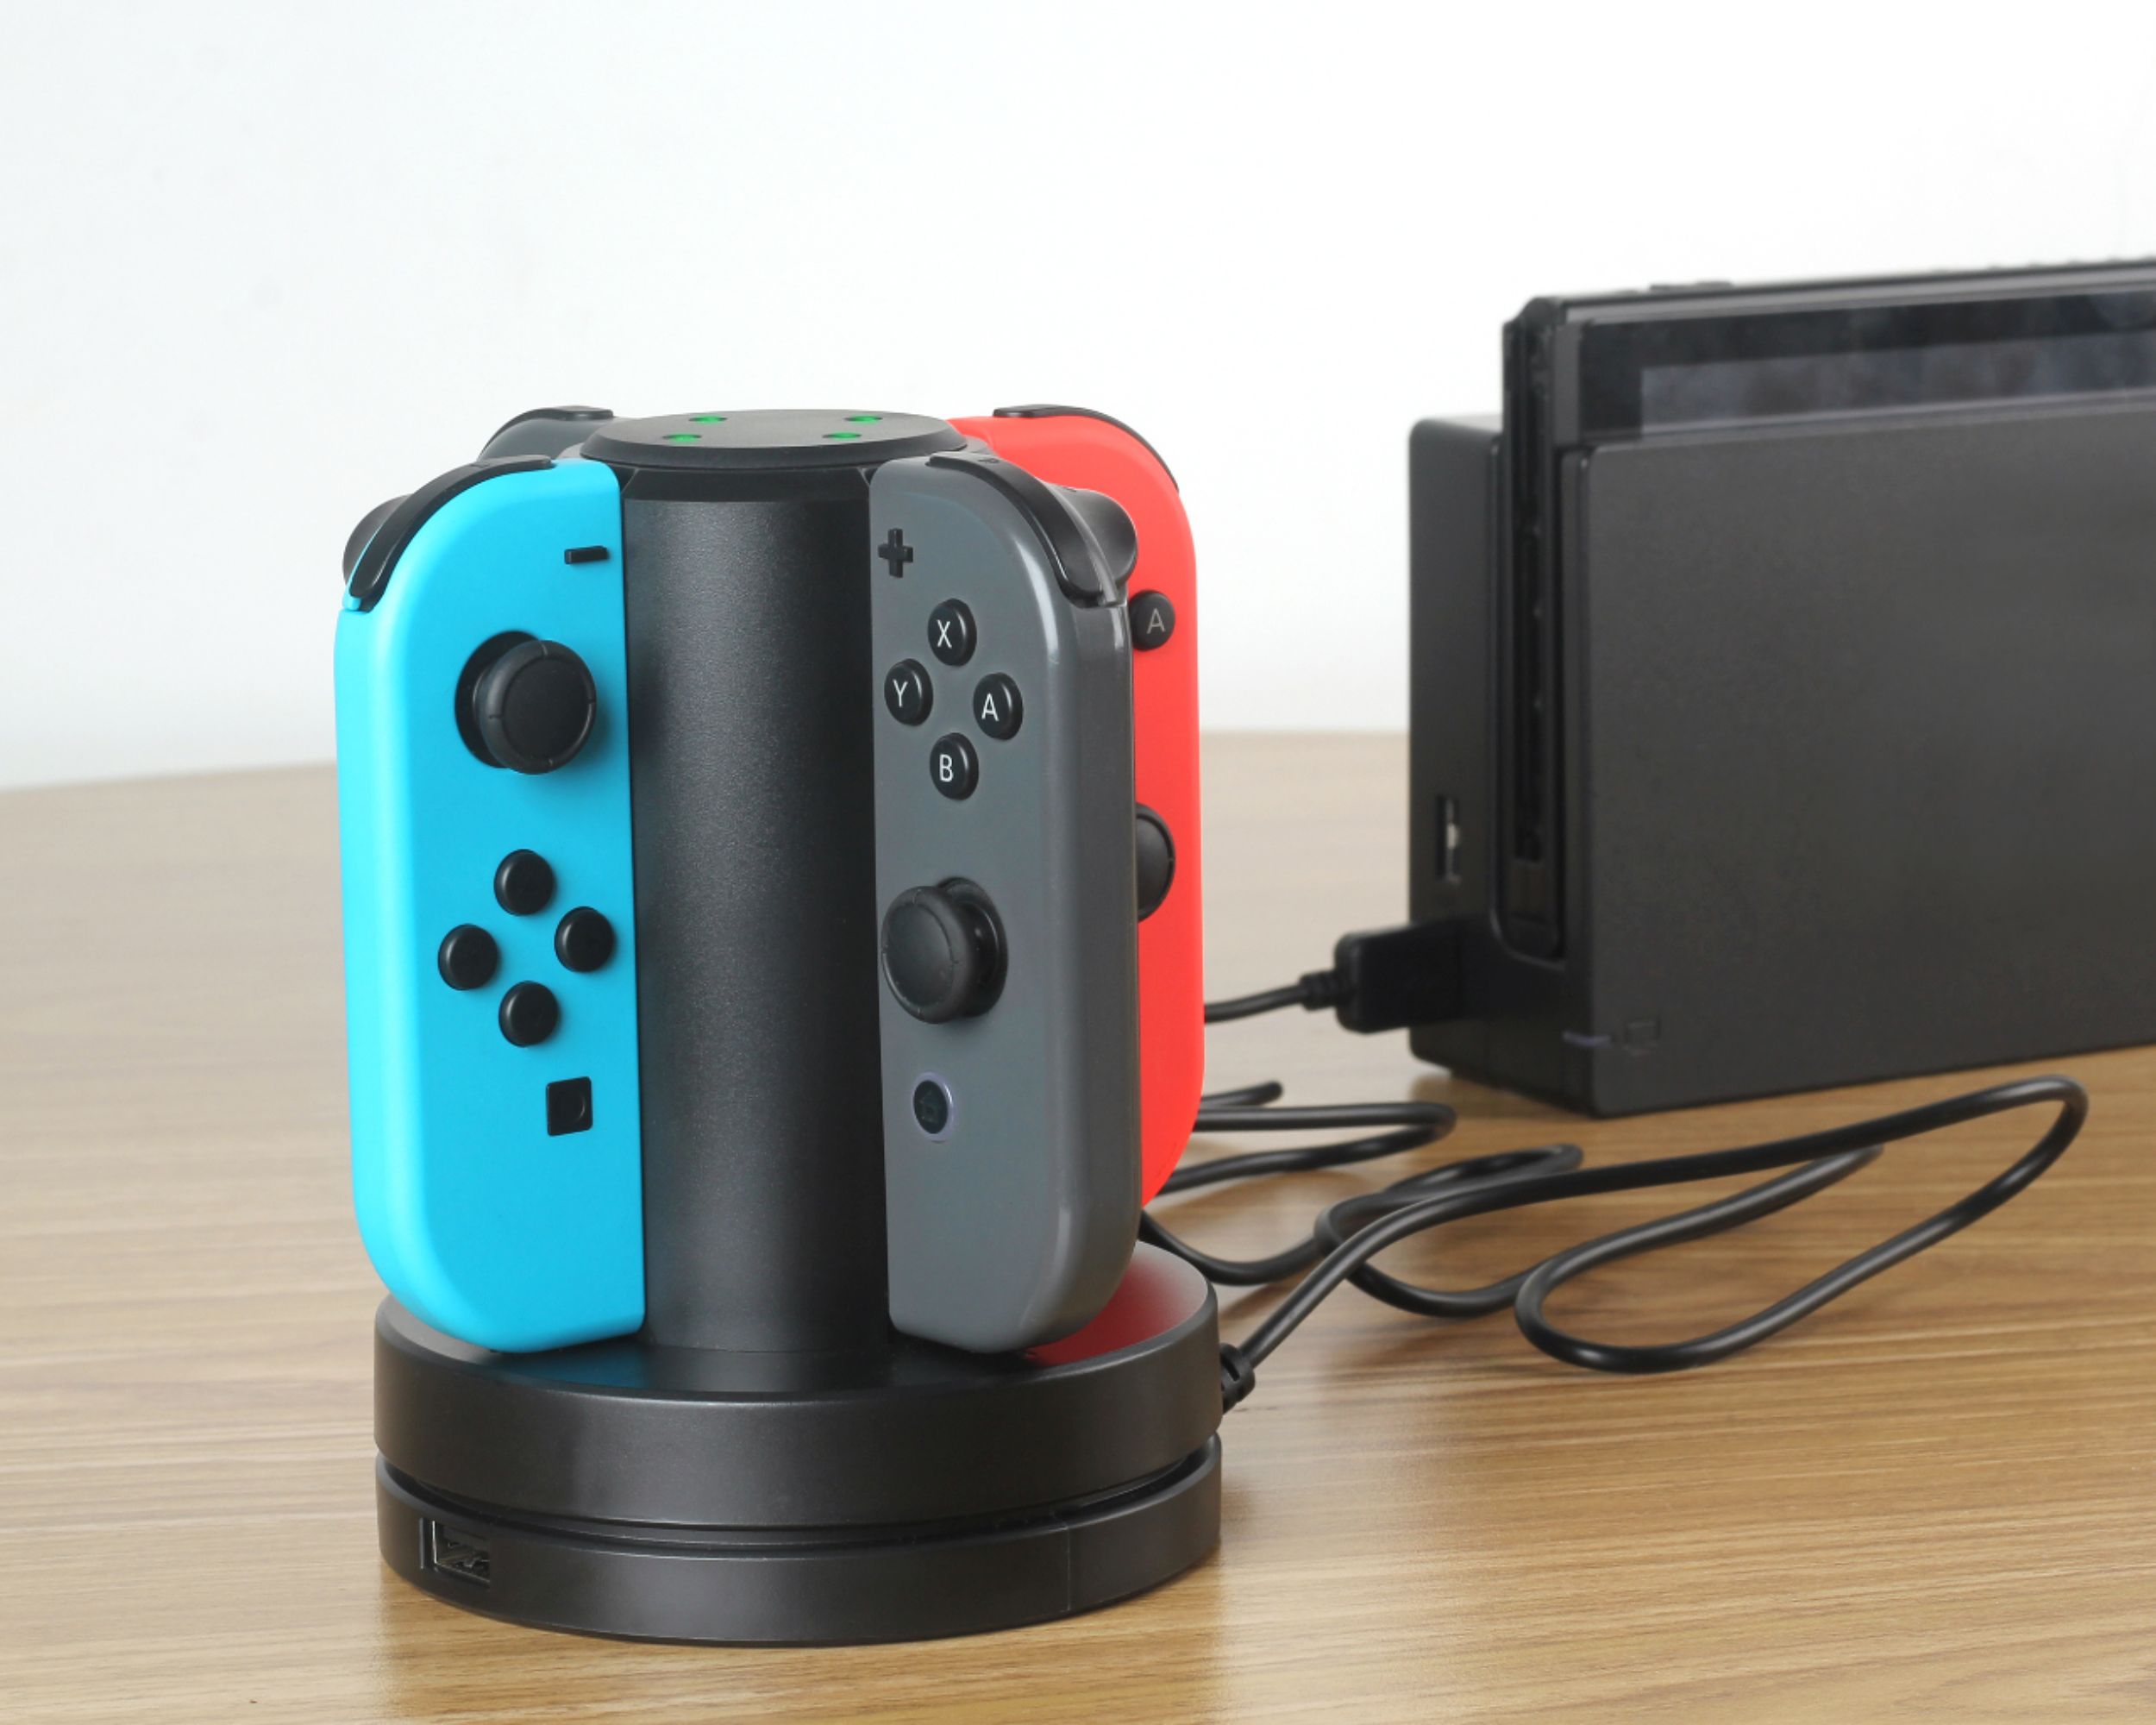 nintendo switch controller charger